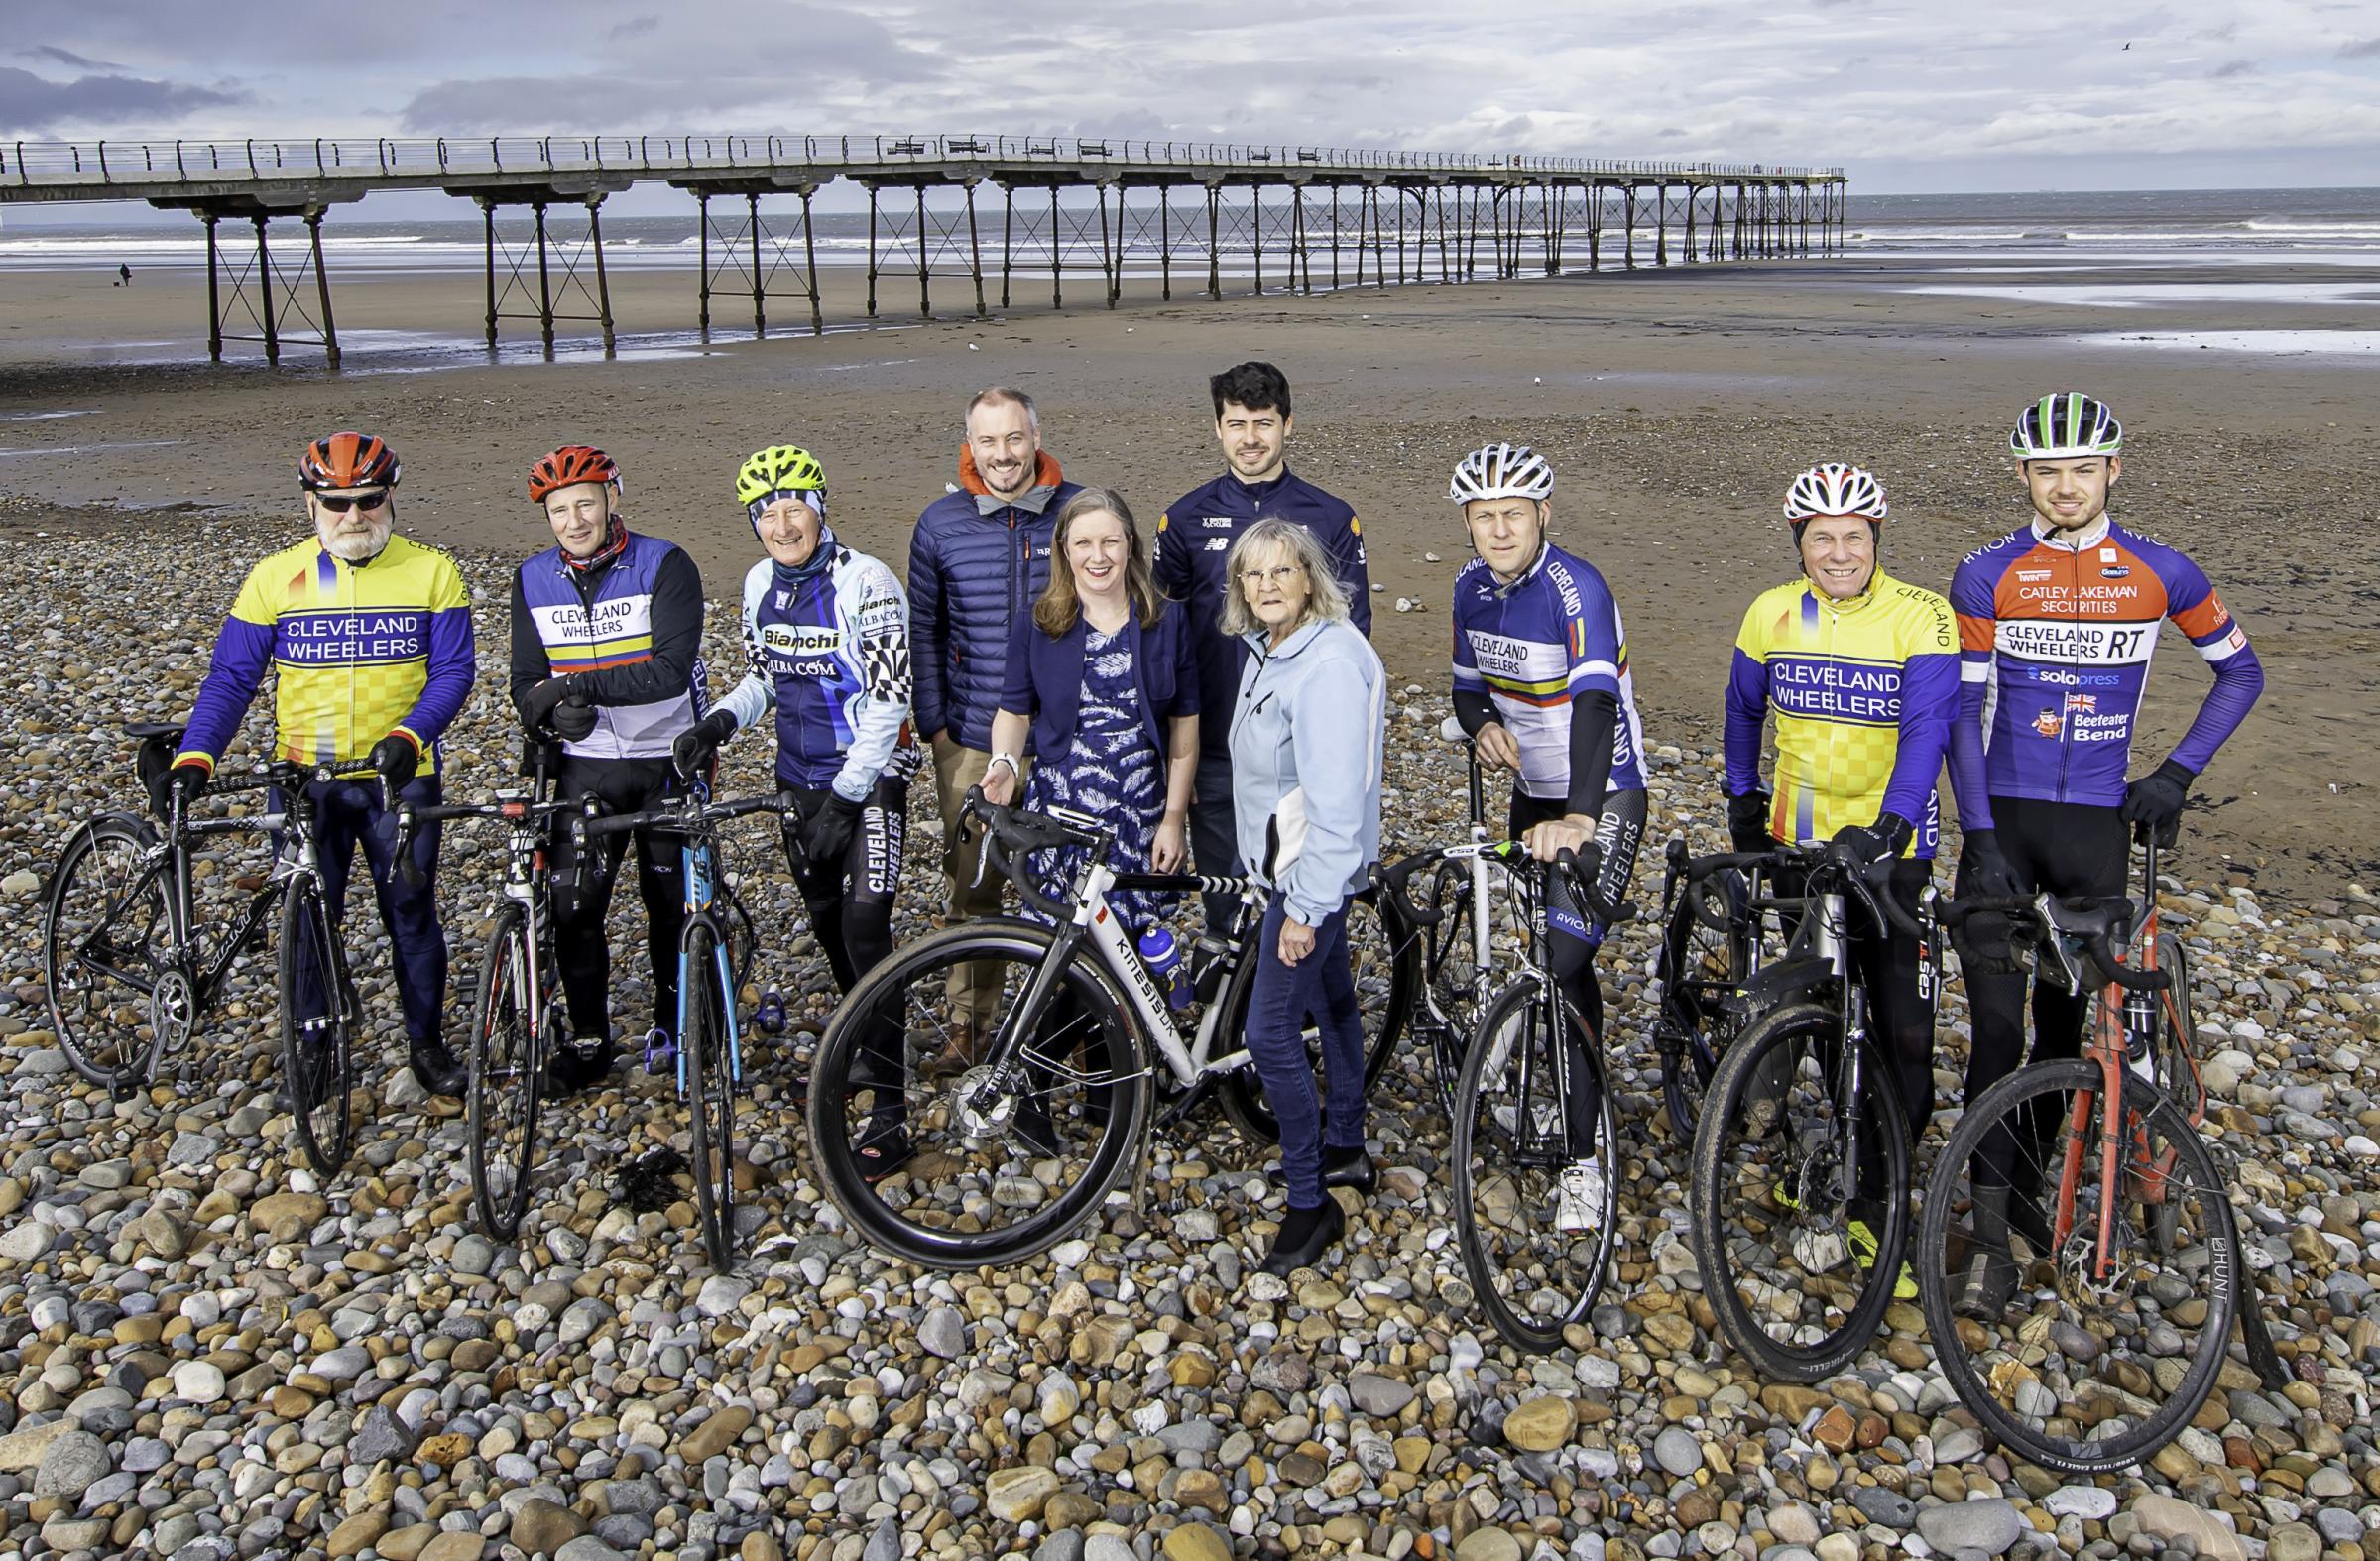 Charlie Tanfield in front of Saltburn pier with Cleveland Wheelers, and Redcar and Cleveland Borough Council members Stephen Mussett, Louise Westbury and Mary Lanigan ahead of the National Road Championships Picture: ALLAN MCKENZIE/SWPIX.COM